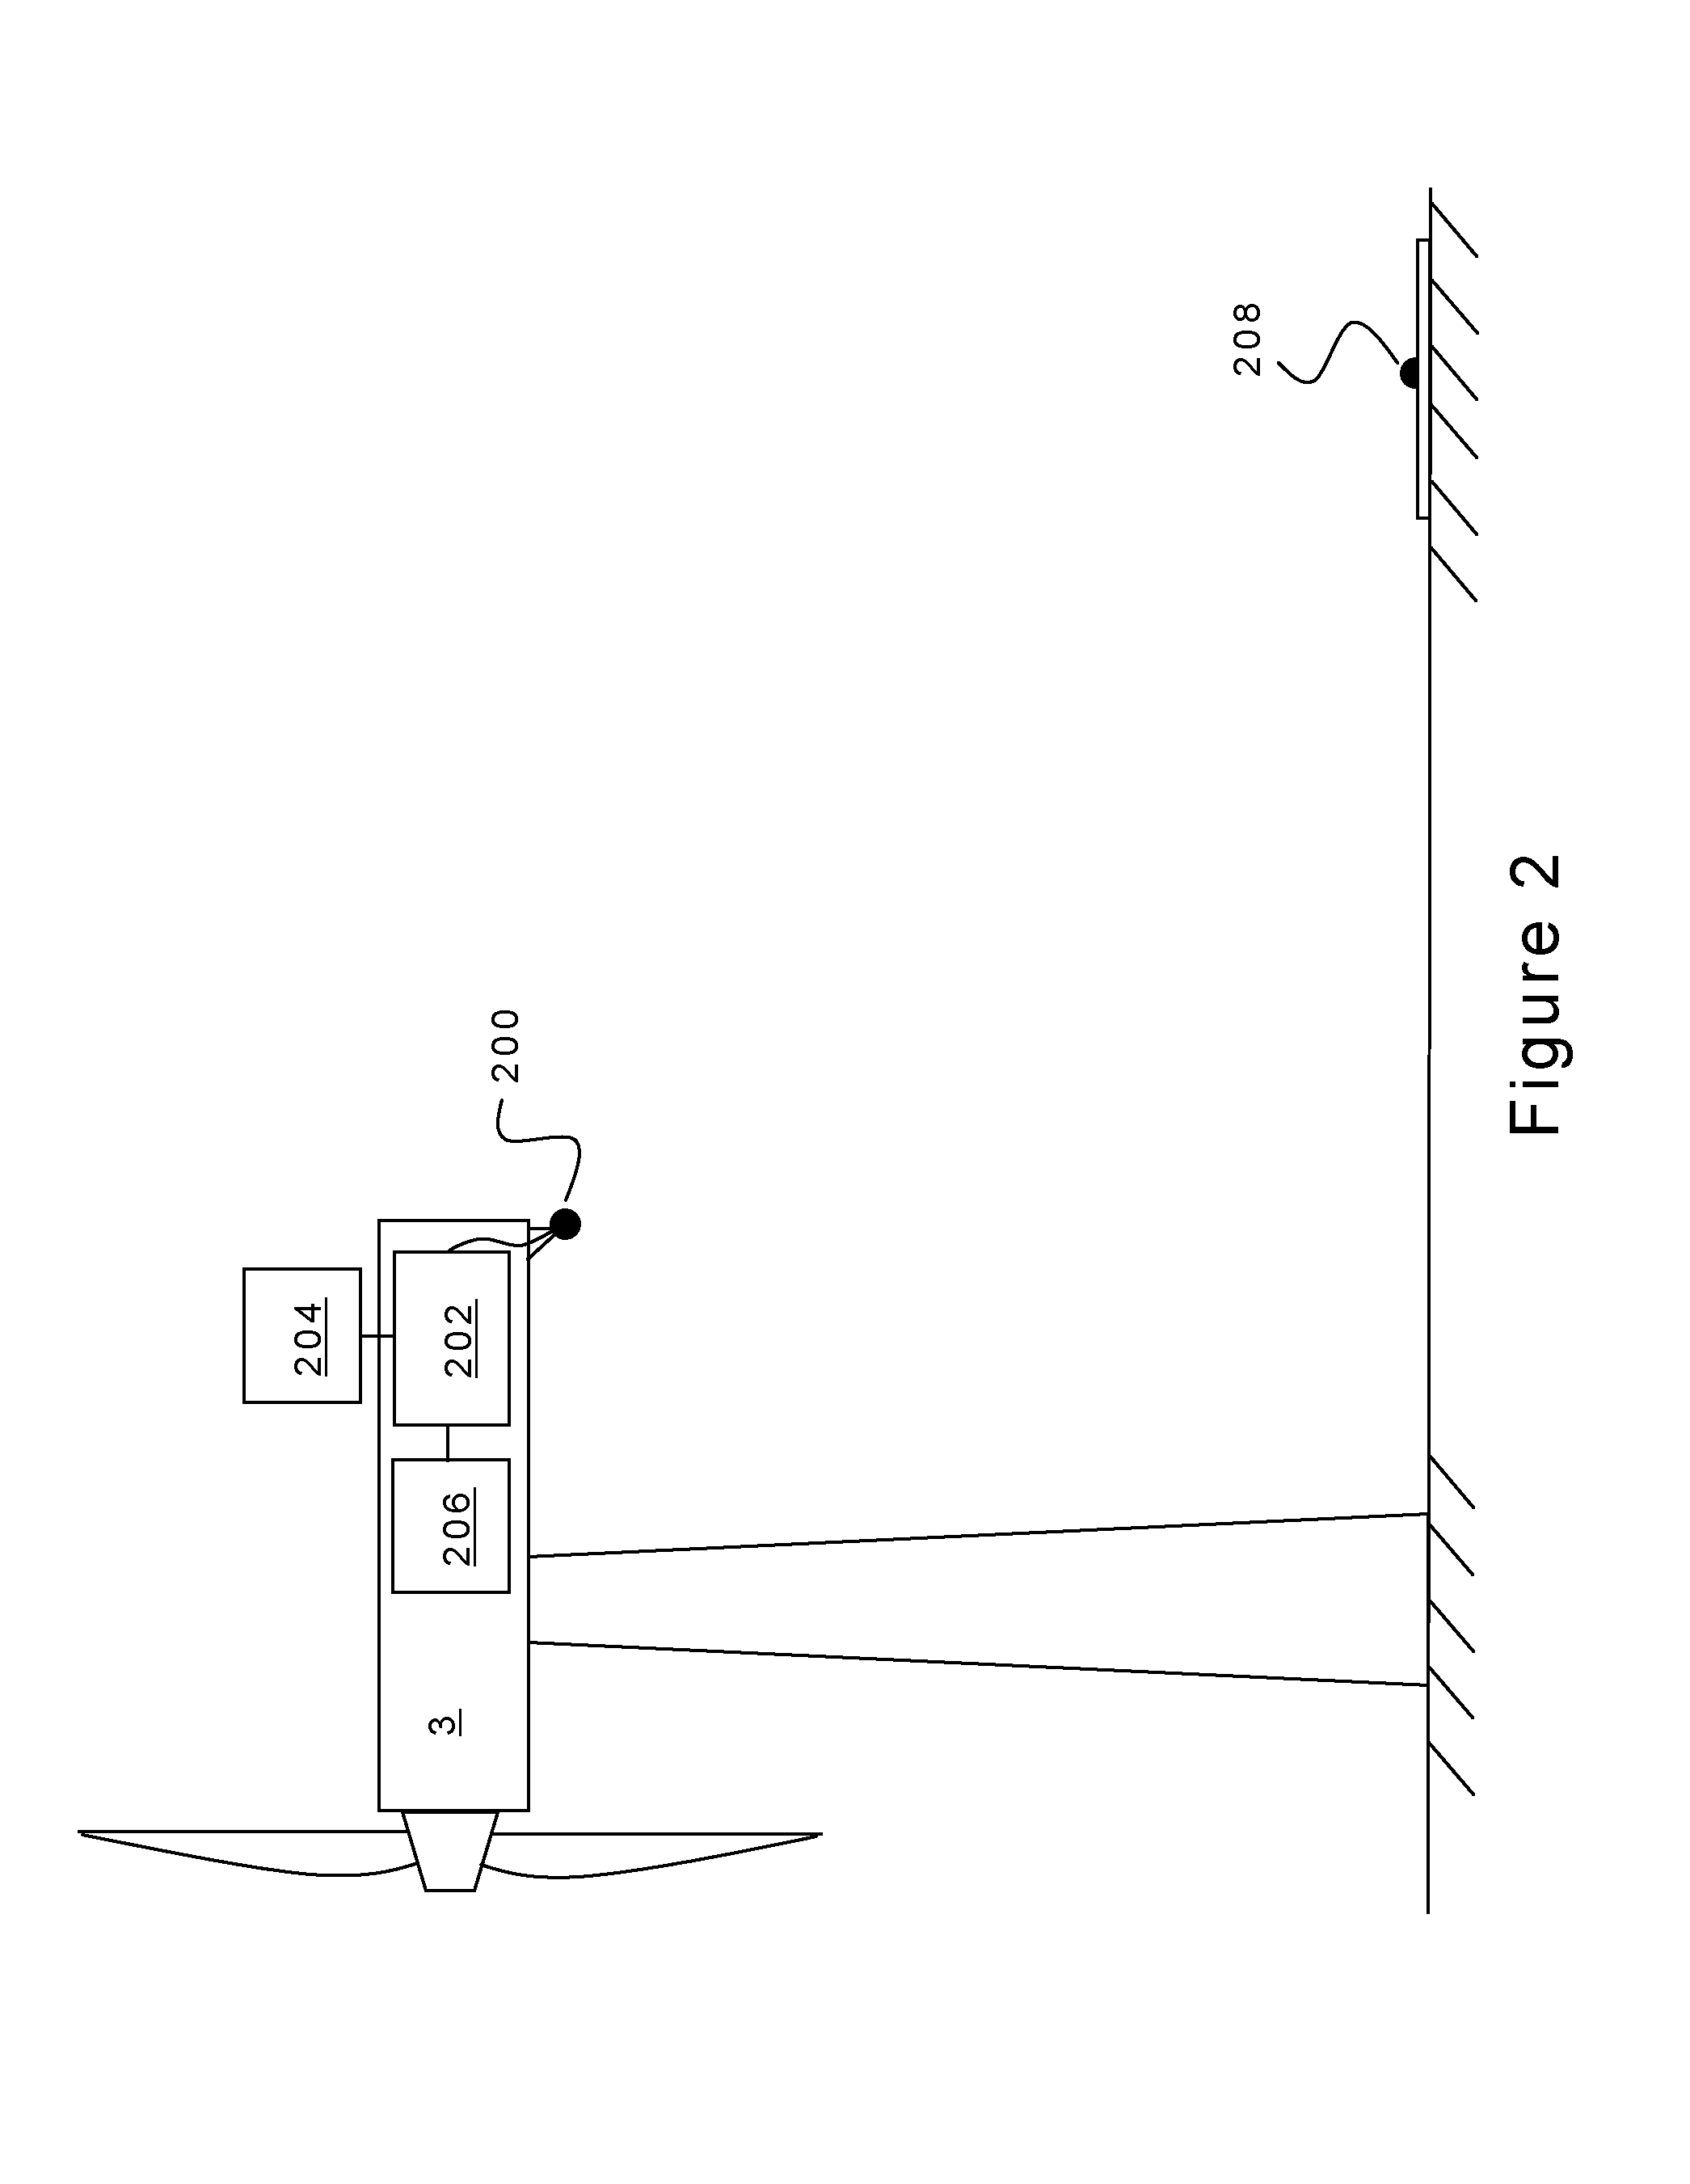 Acoustic noise monitoring system for a wind turbine